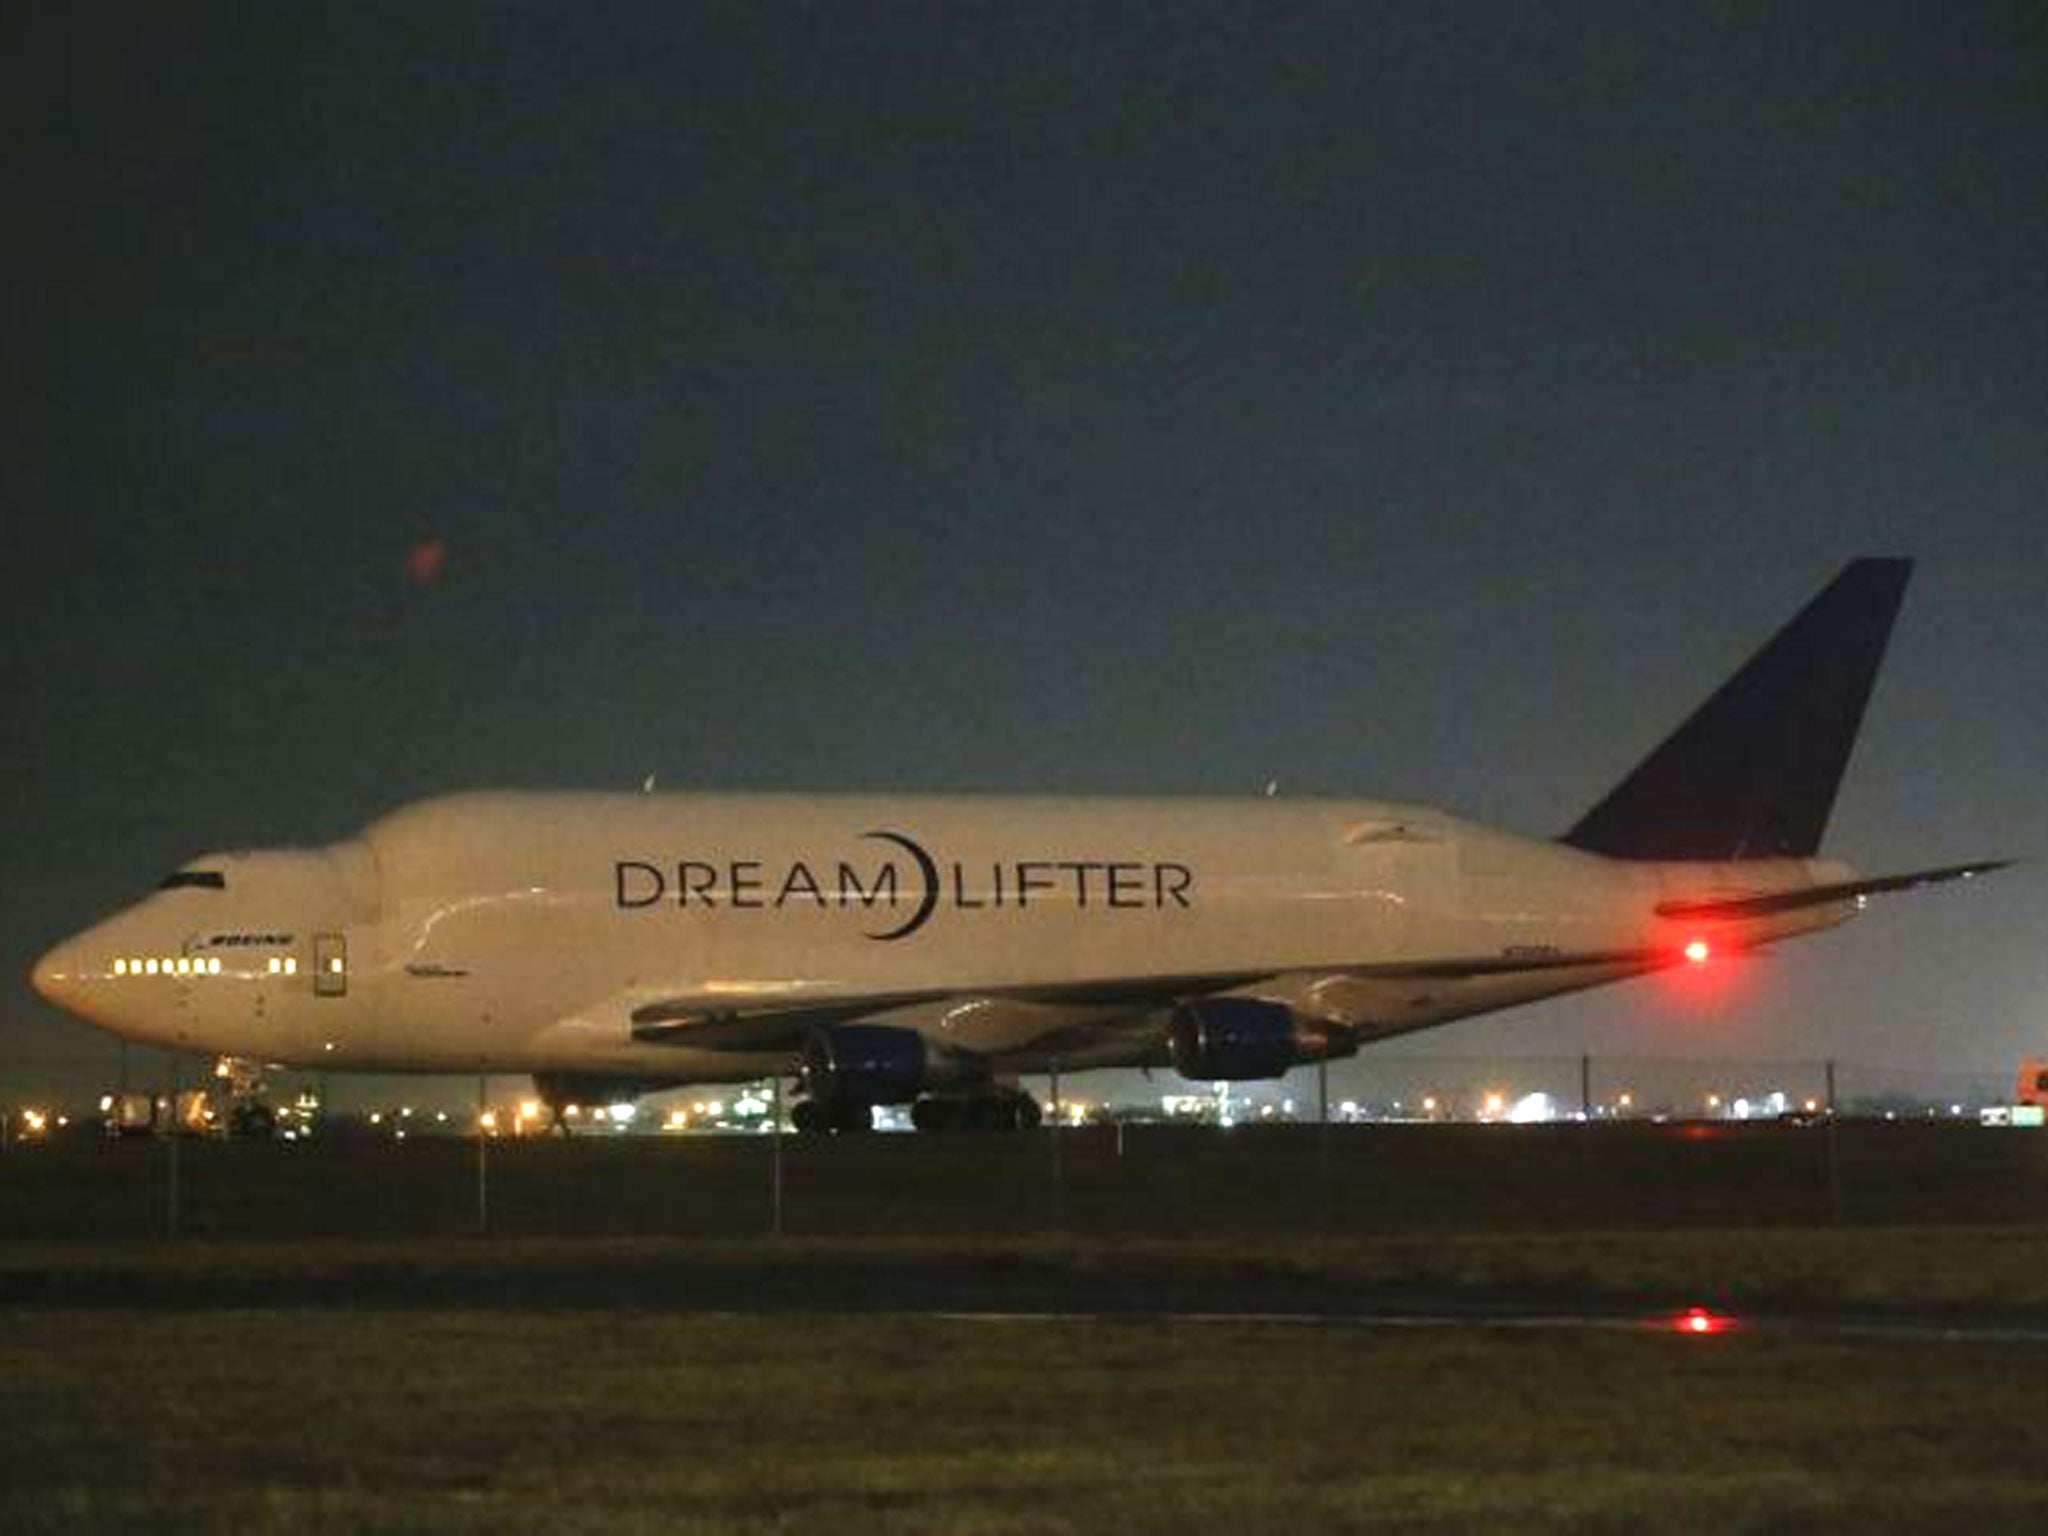 A Boeing 747 LCF Dreamlifter sits on the runway after accidentally landing at Jabara airport in Wichita, Kansas thinking it was landing at McConnell Air Force Base